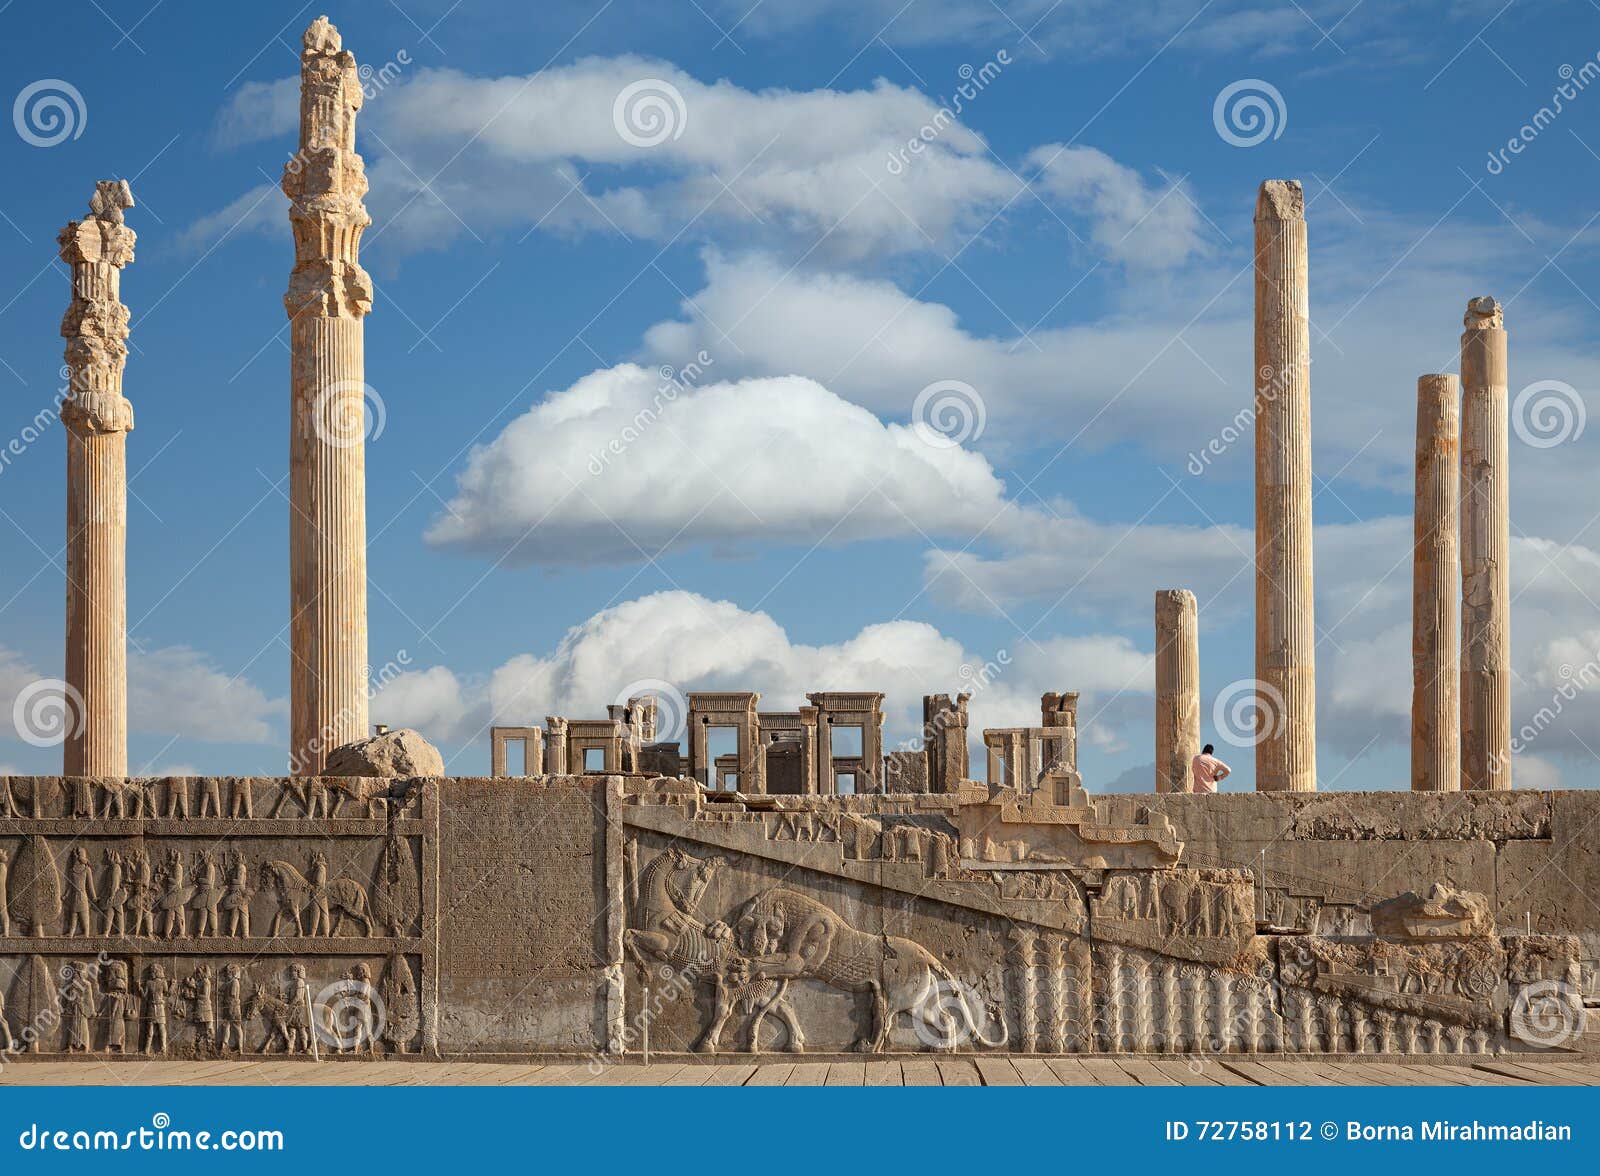 ruins of persepolis unesco world heritage site against cloudy blue sky in shiraz city of iran